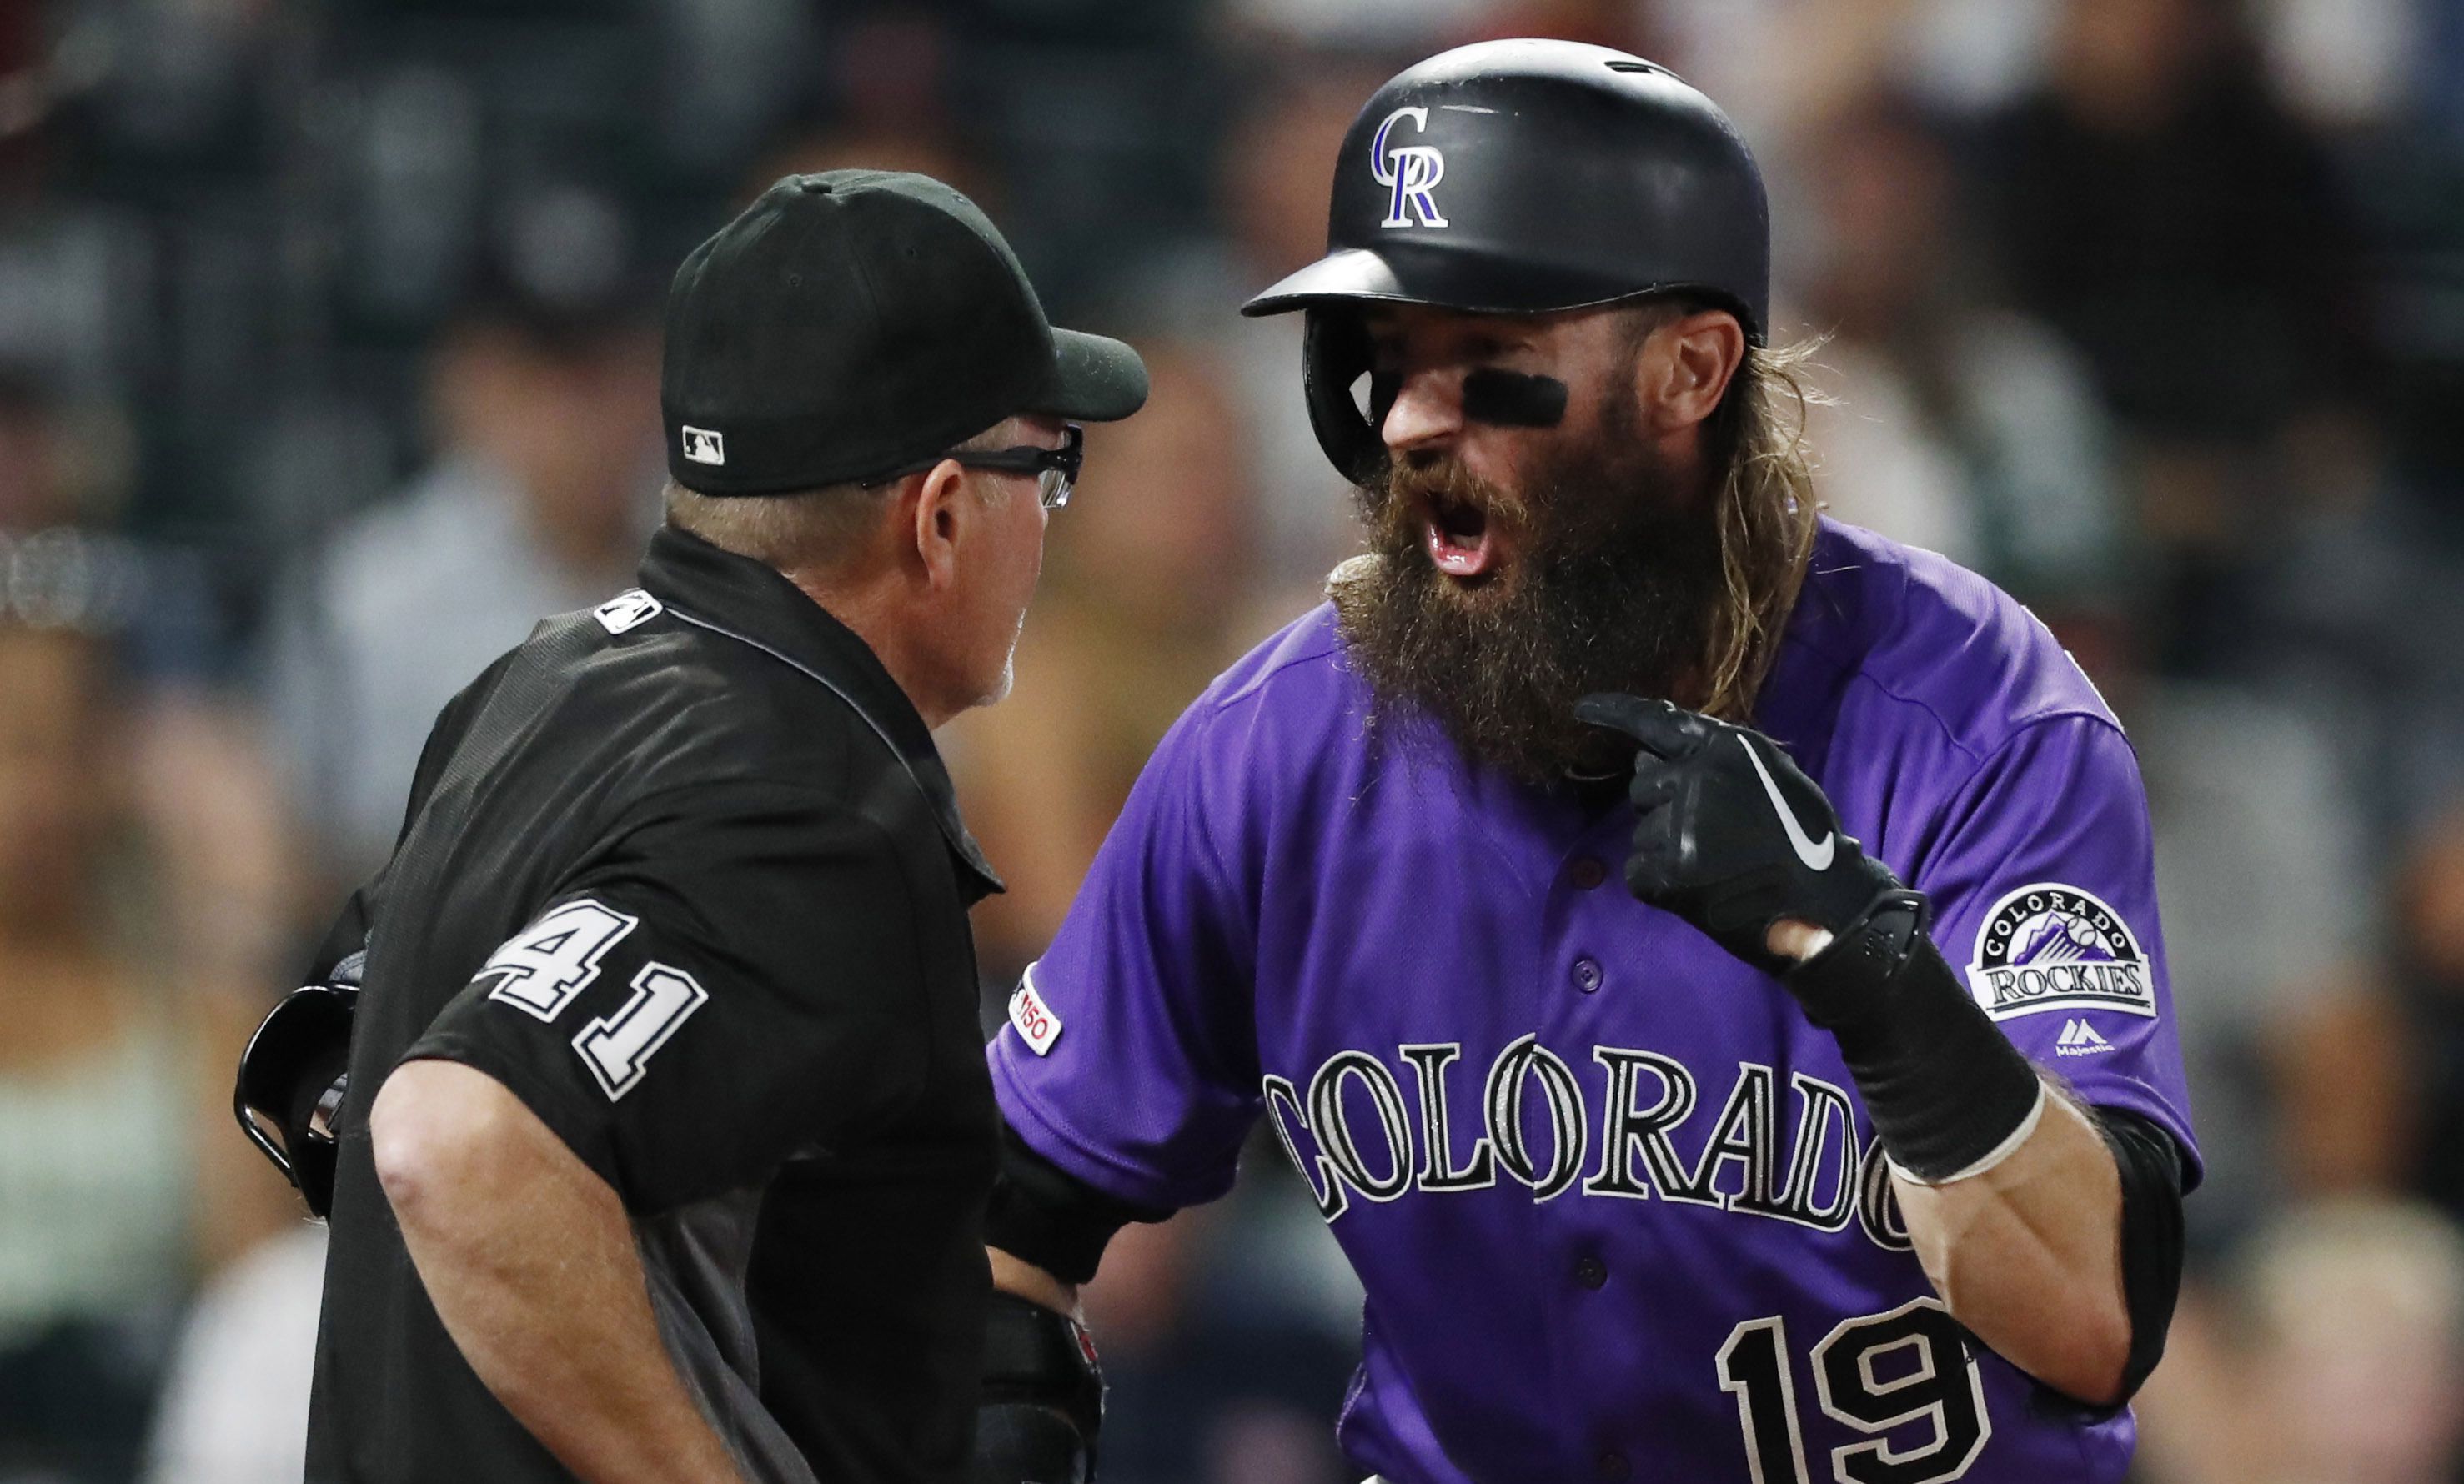 Colorado Rockies outfielder Charlie Blackmon goes on 10-day IL